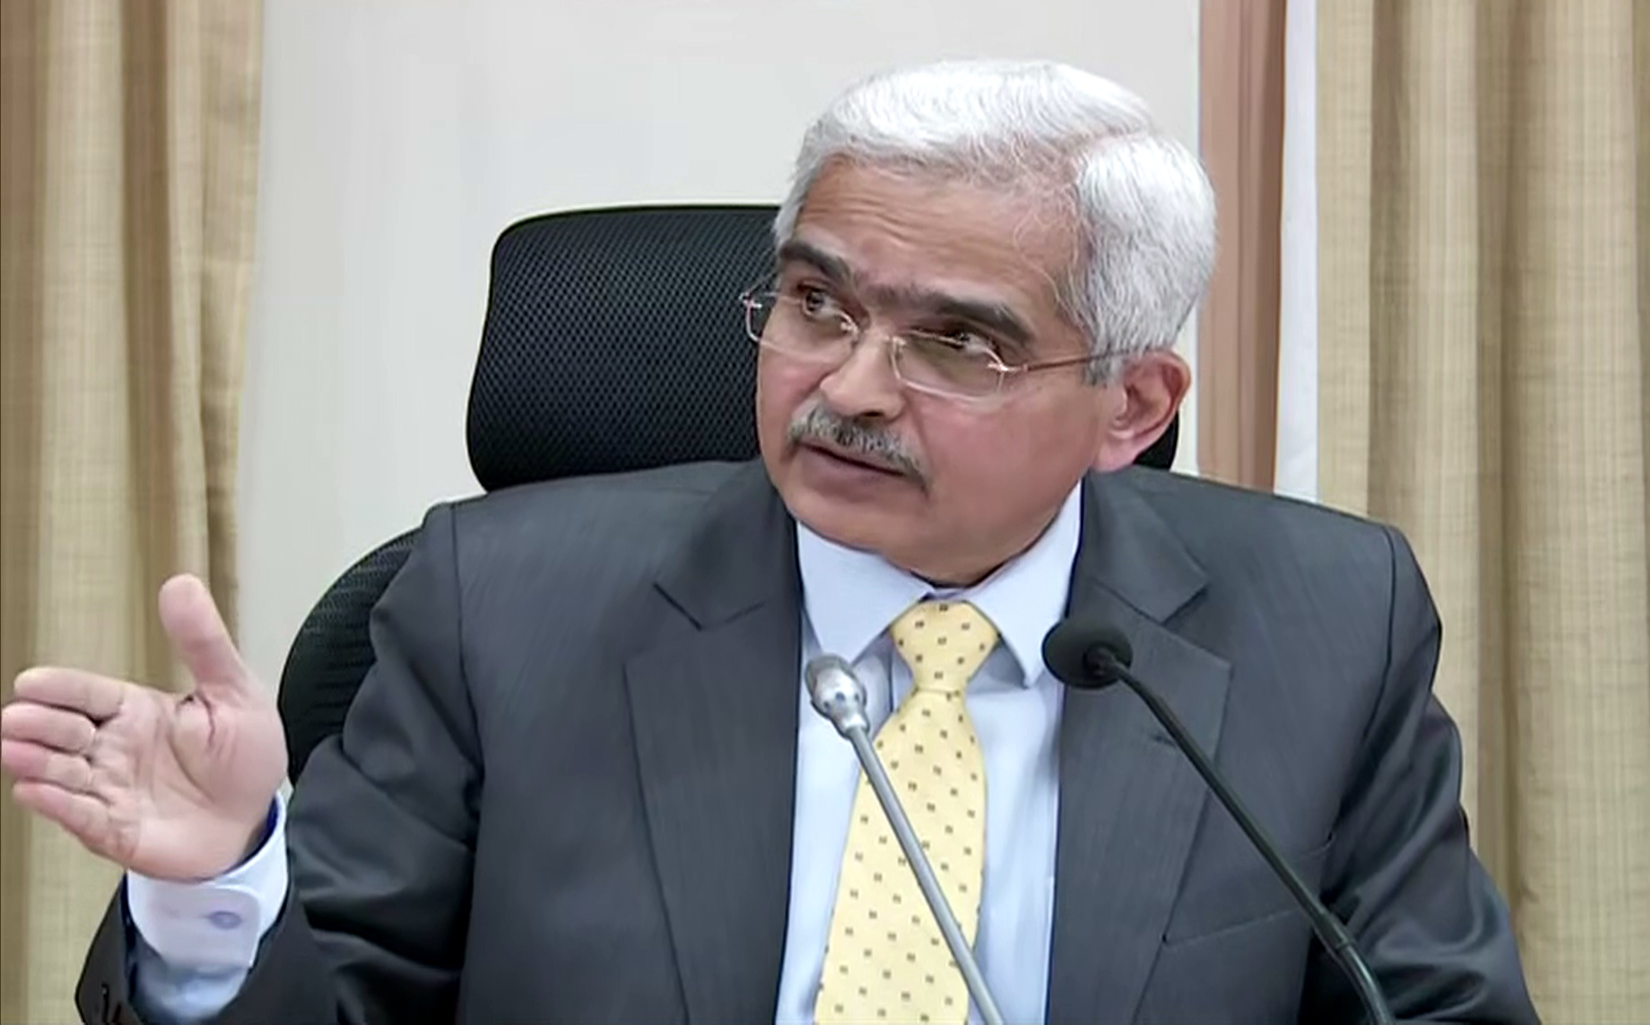 RBI Governor says no reason to doubt govt will meet fiscal deficit targets